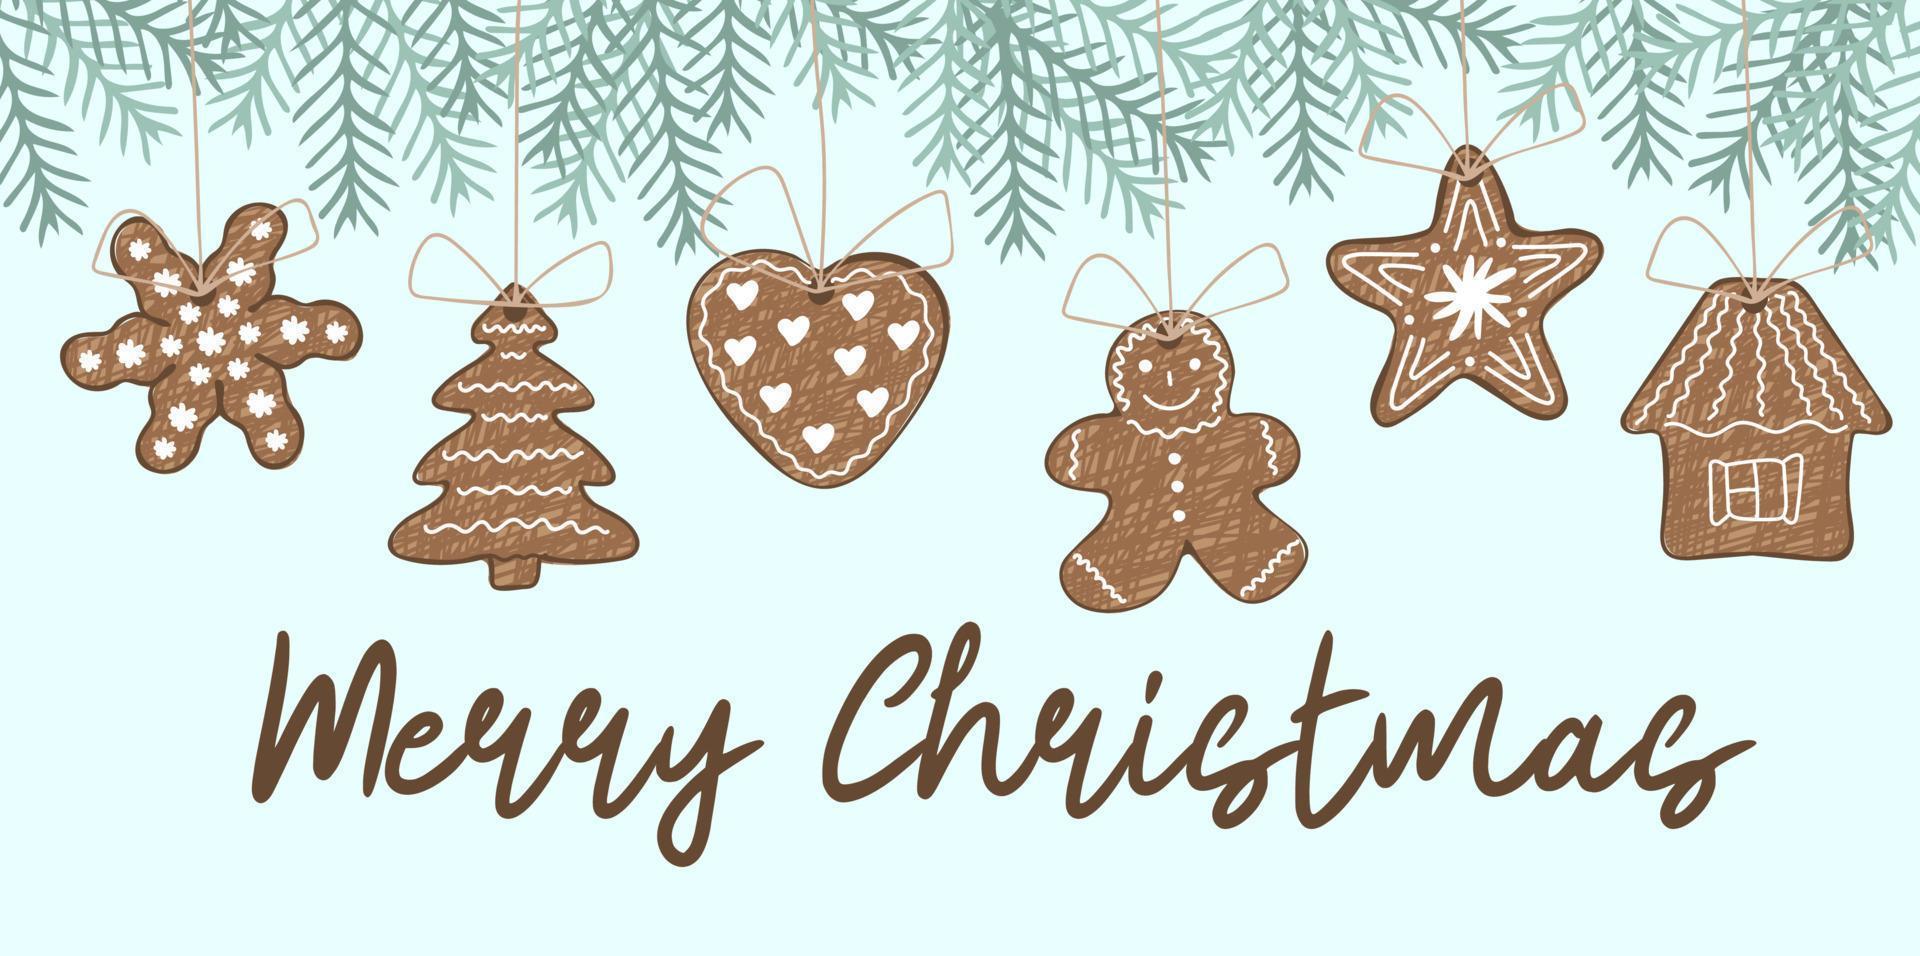 Merry Christmas hand drawn poster with gingerbreads vector